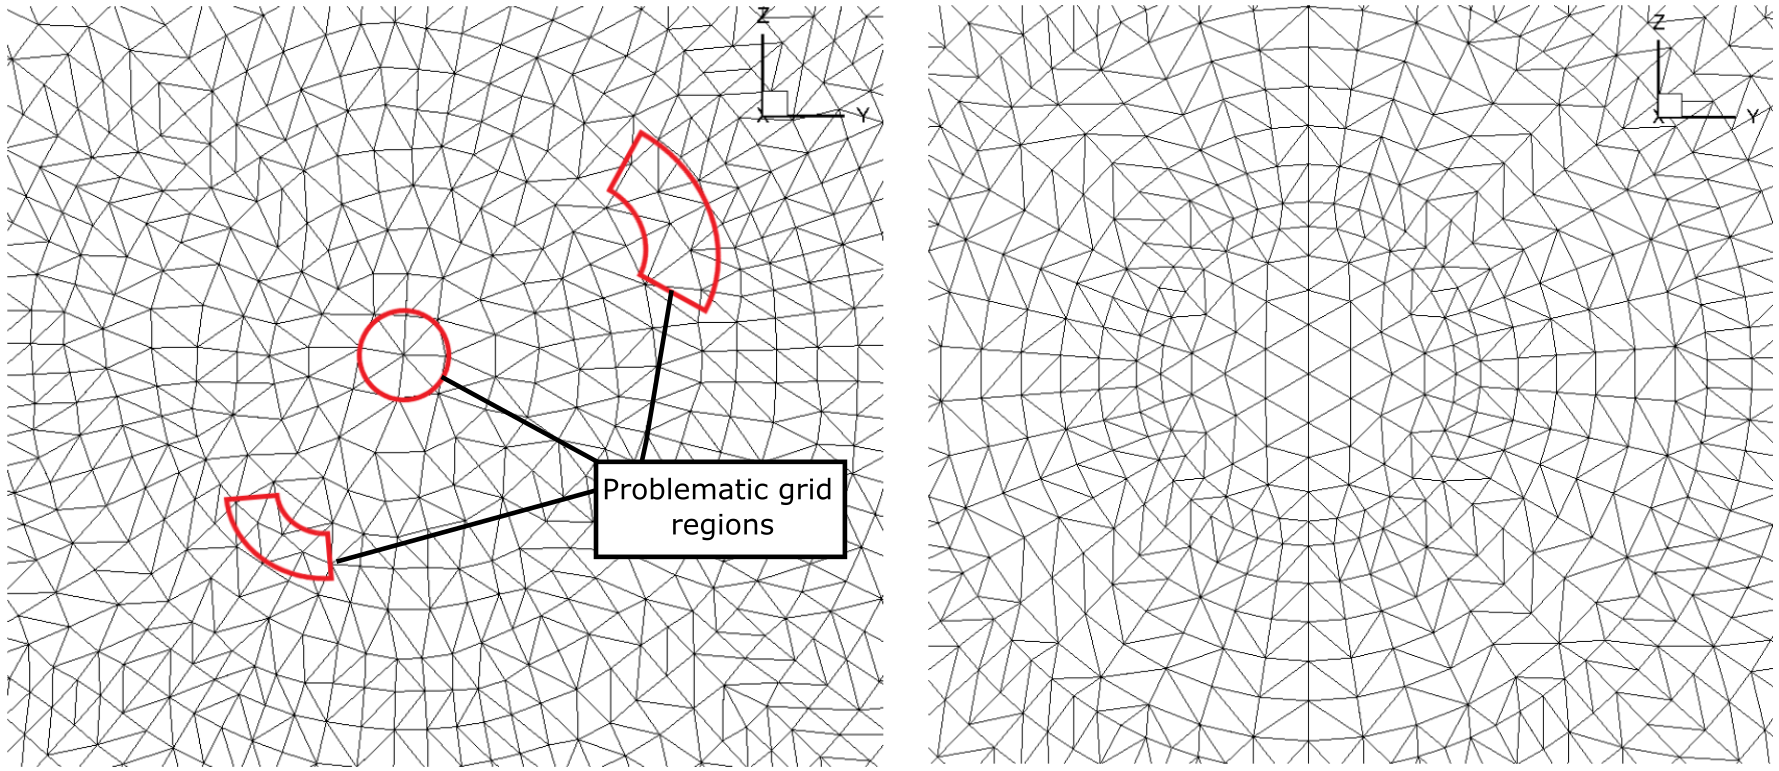 Grid on the left shows regions where sliding will be problematic